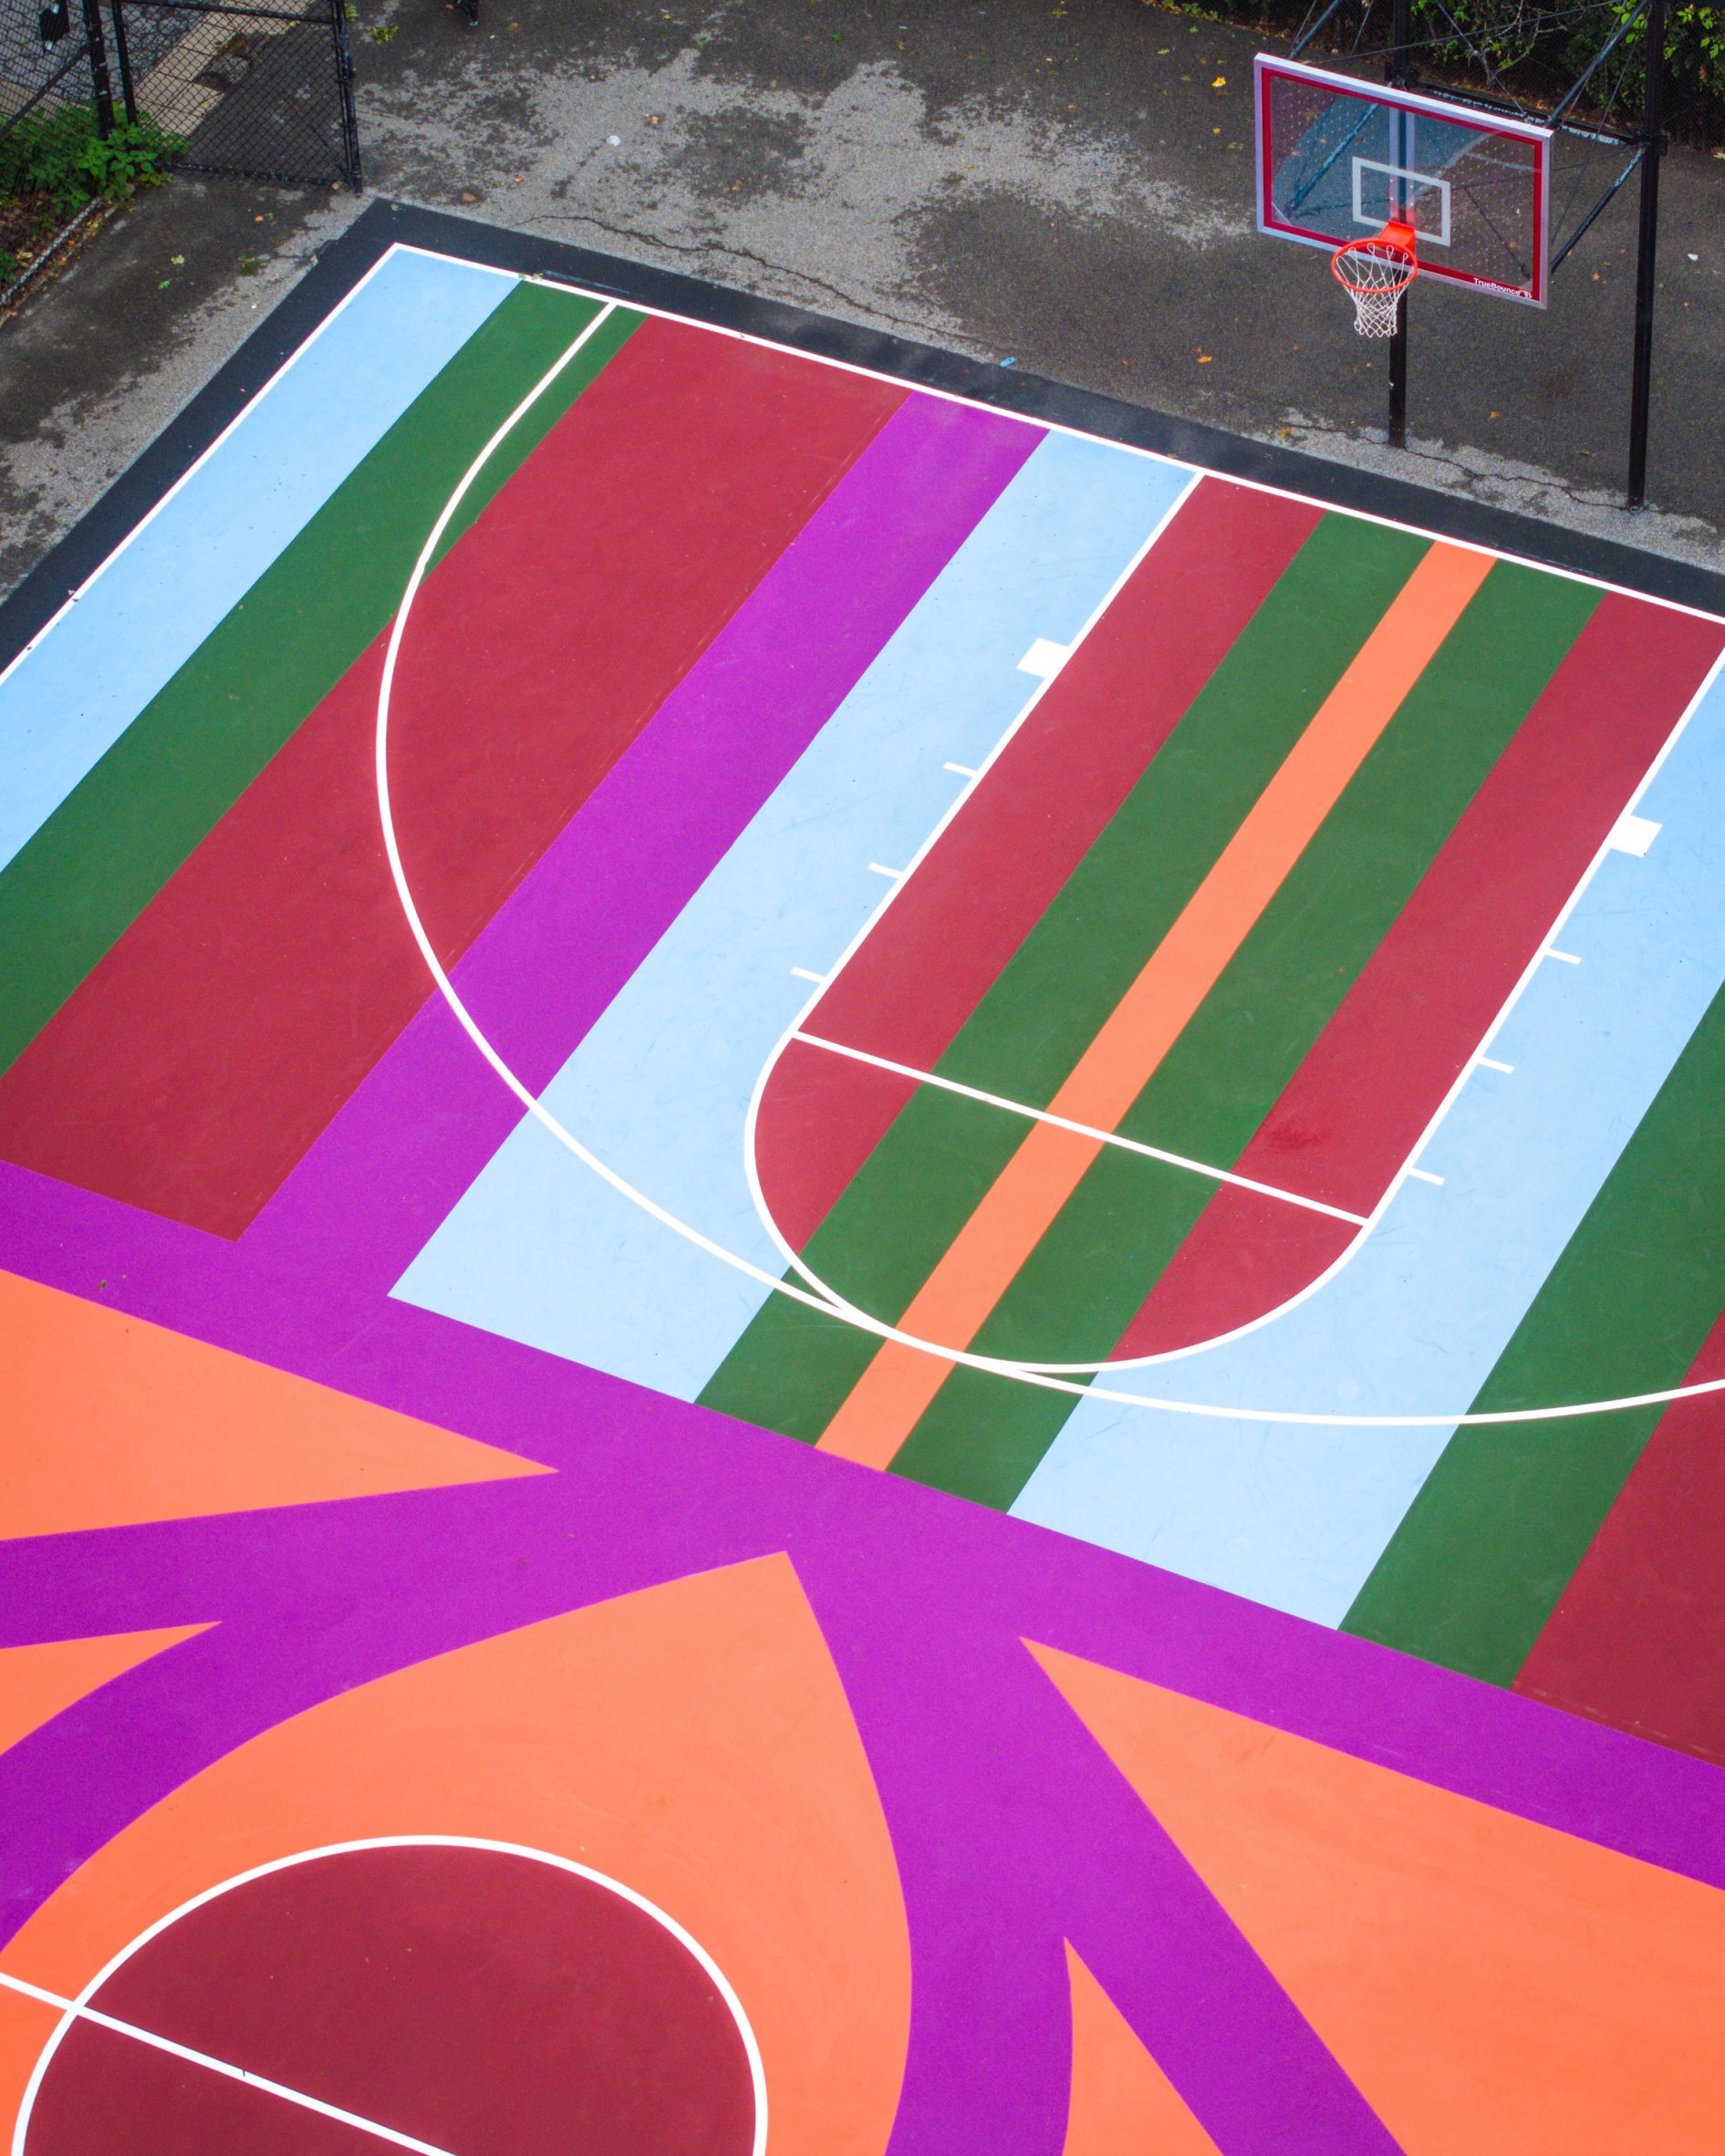 Tompkins Square Park Basketball Court installation by Glossier